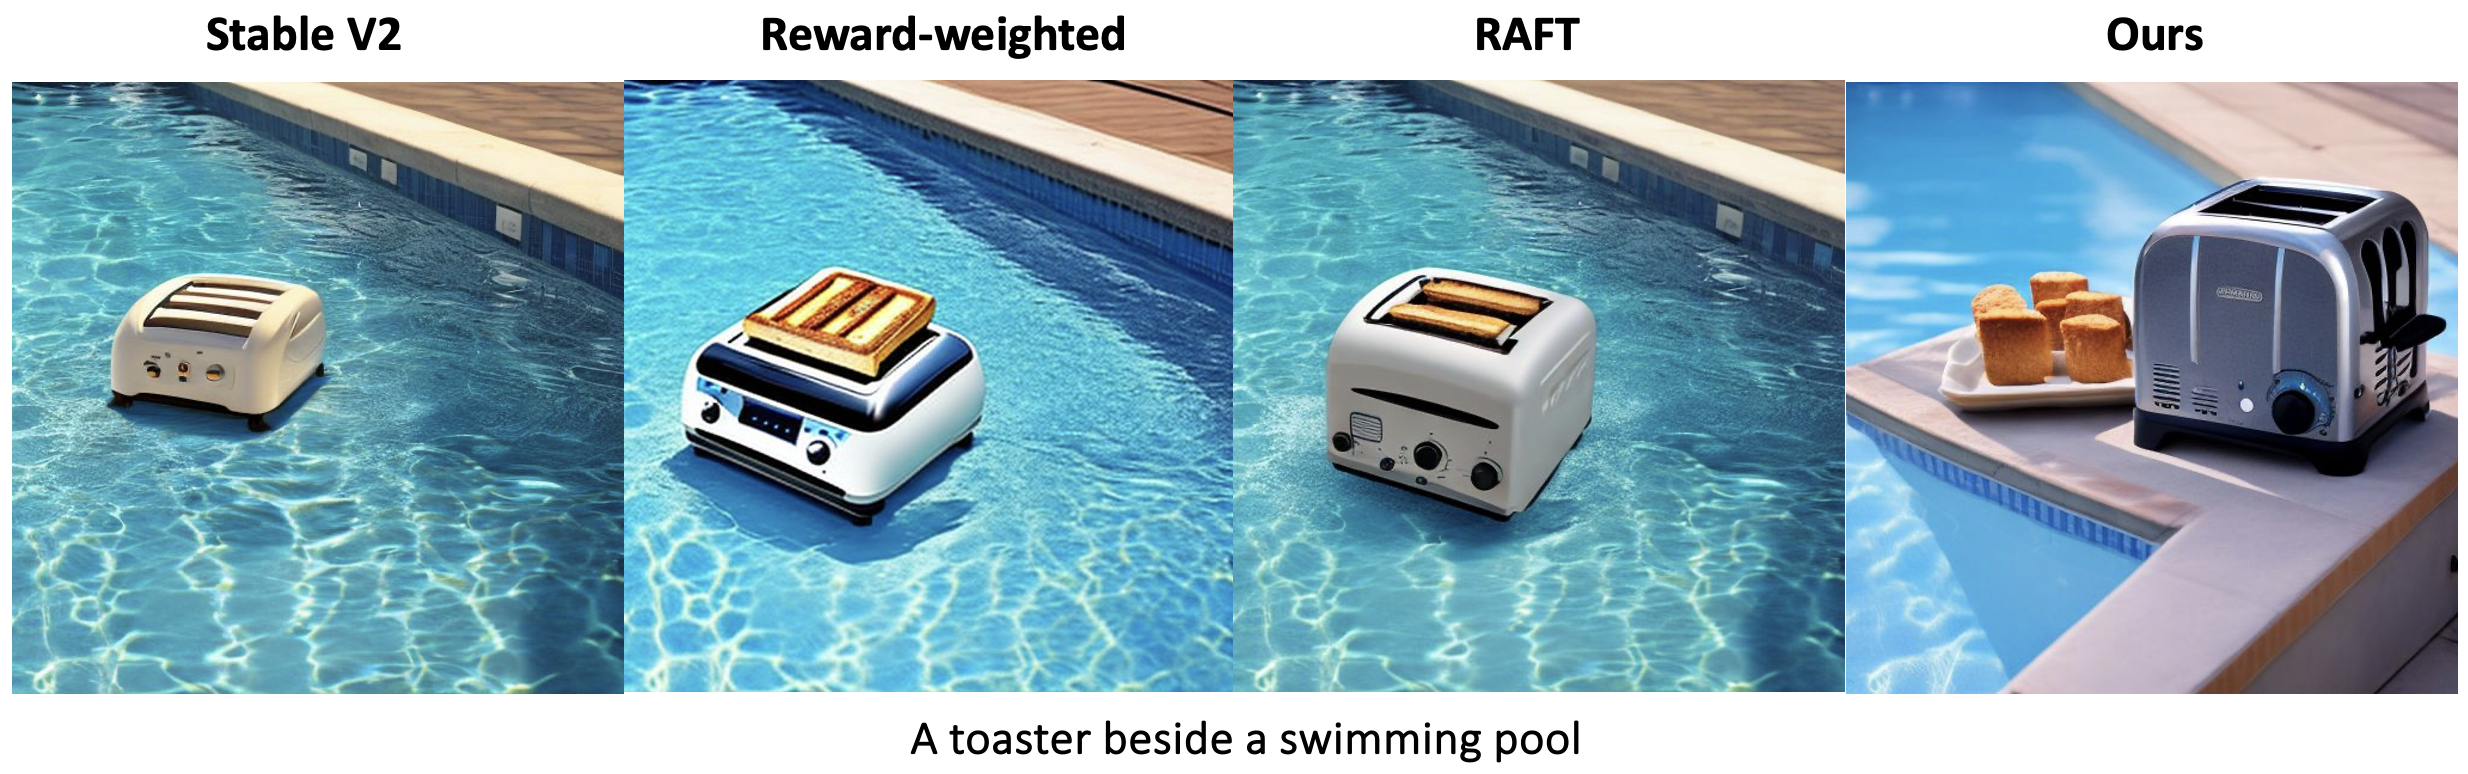 A toaster beside a swimming pool